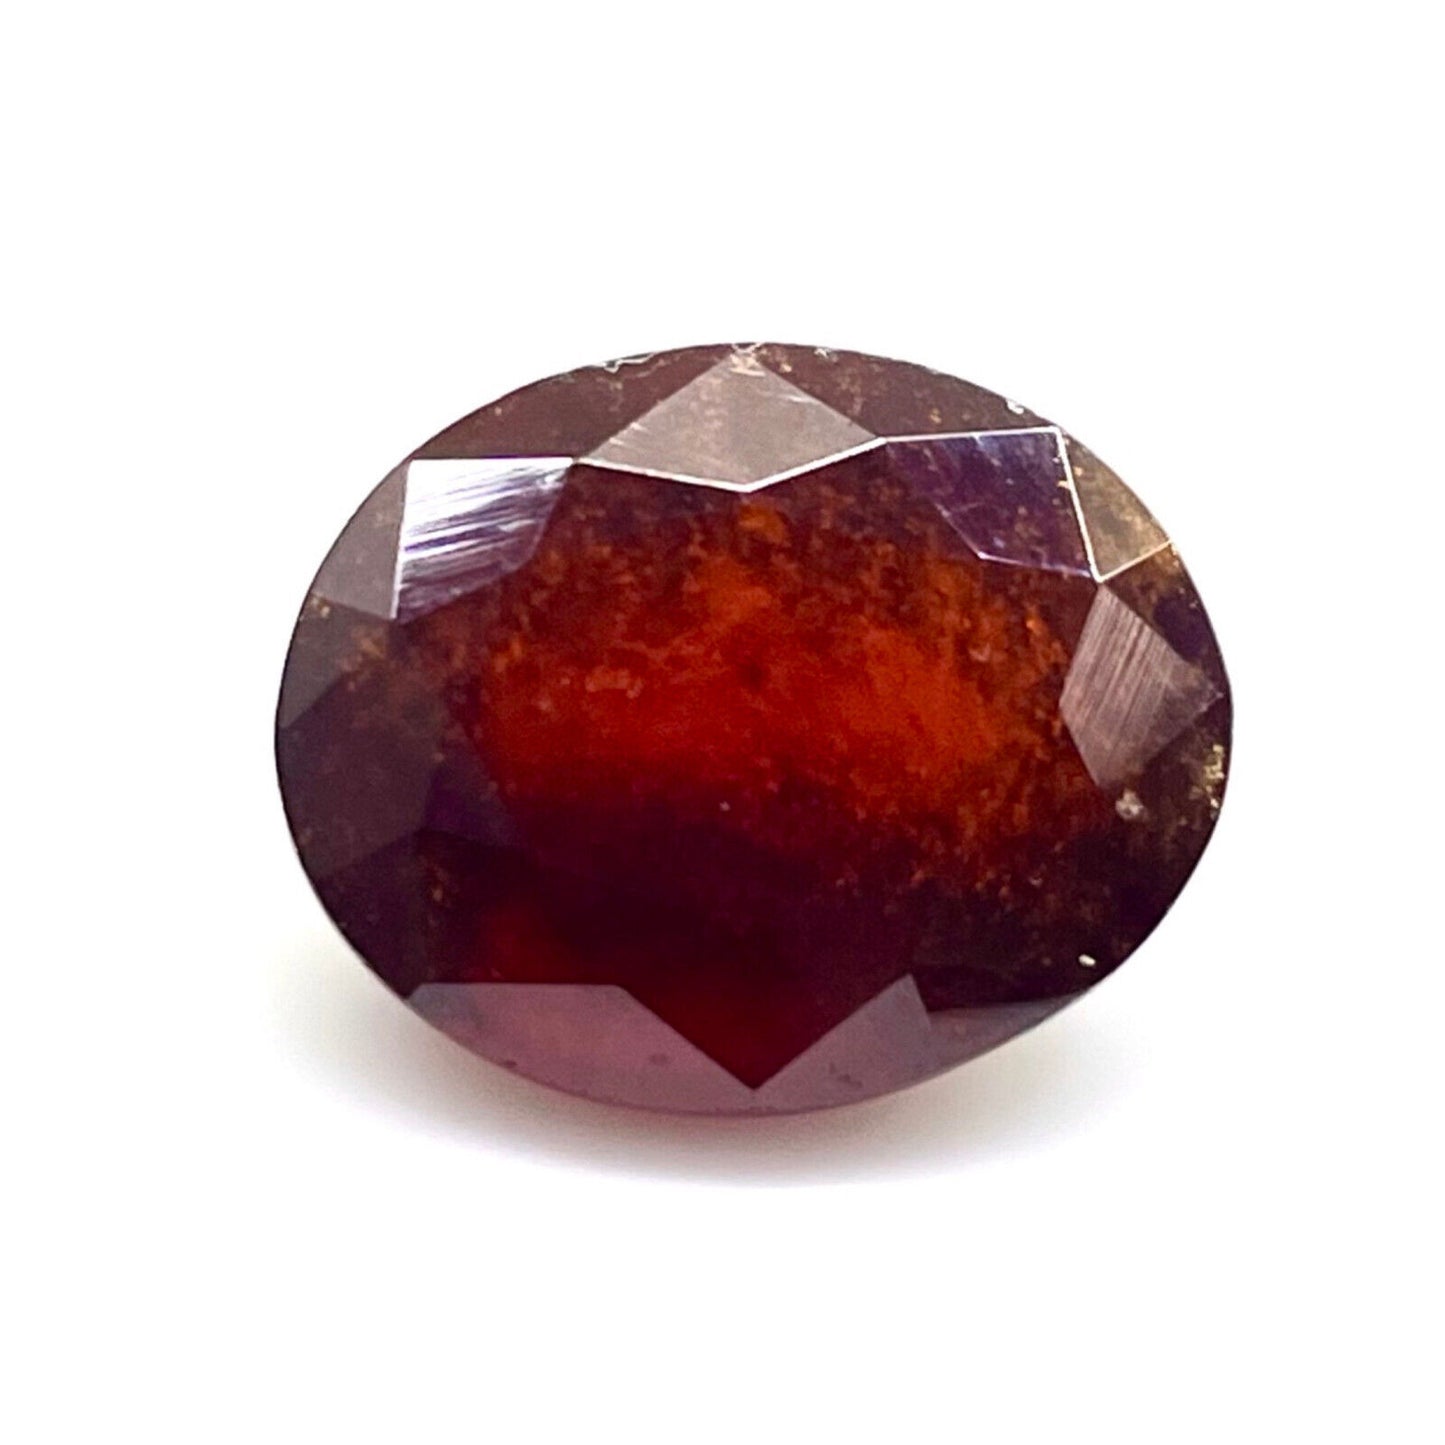 Grenat hessonite ovale a facettes 14x11x8 mm  9.60 carats